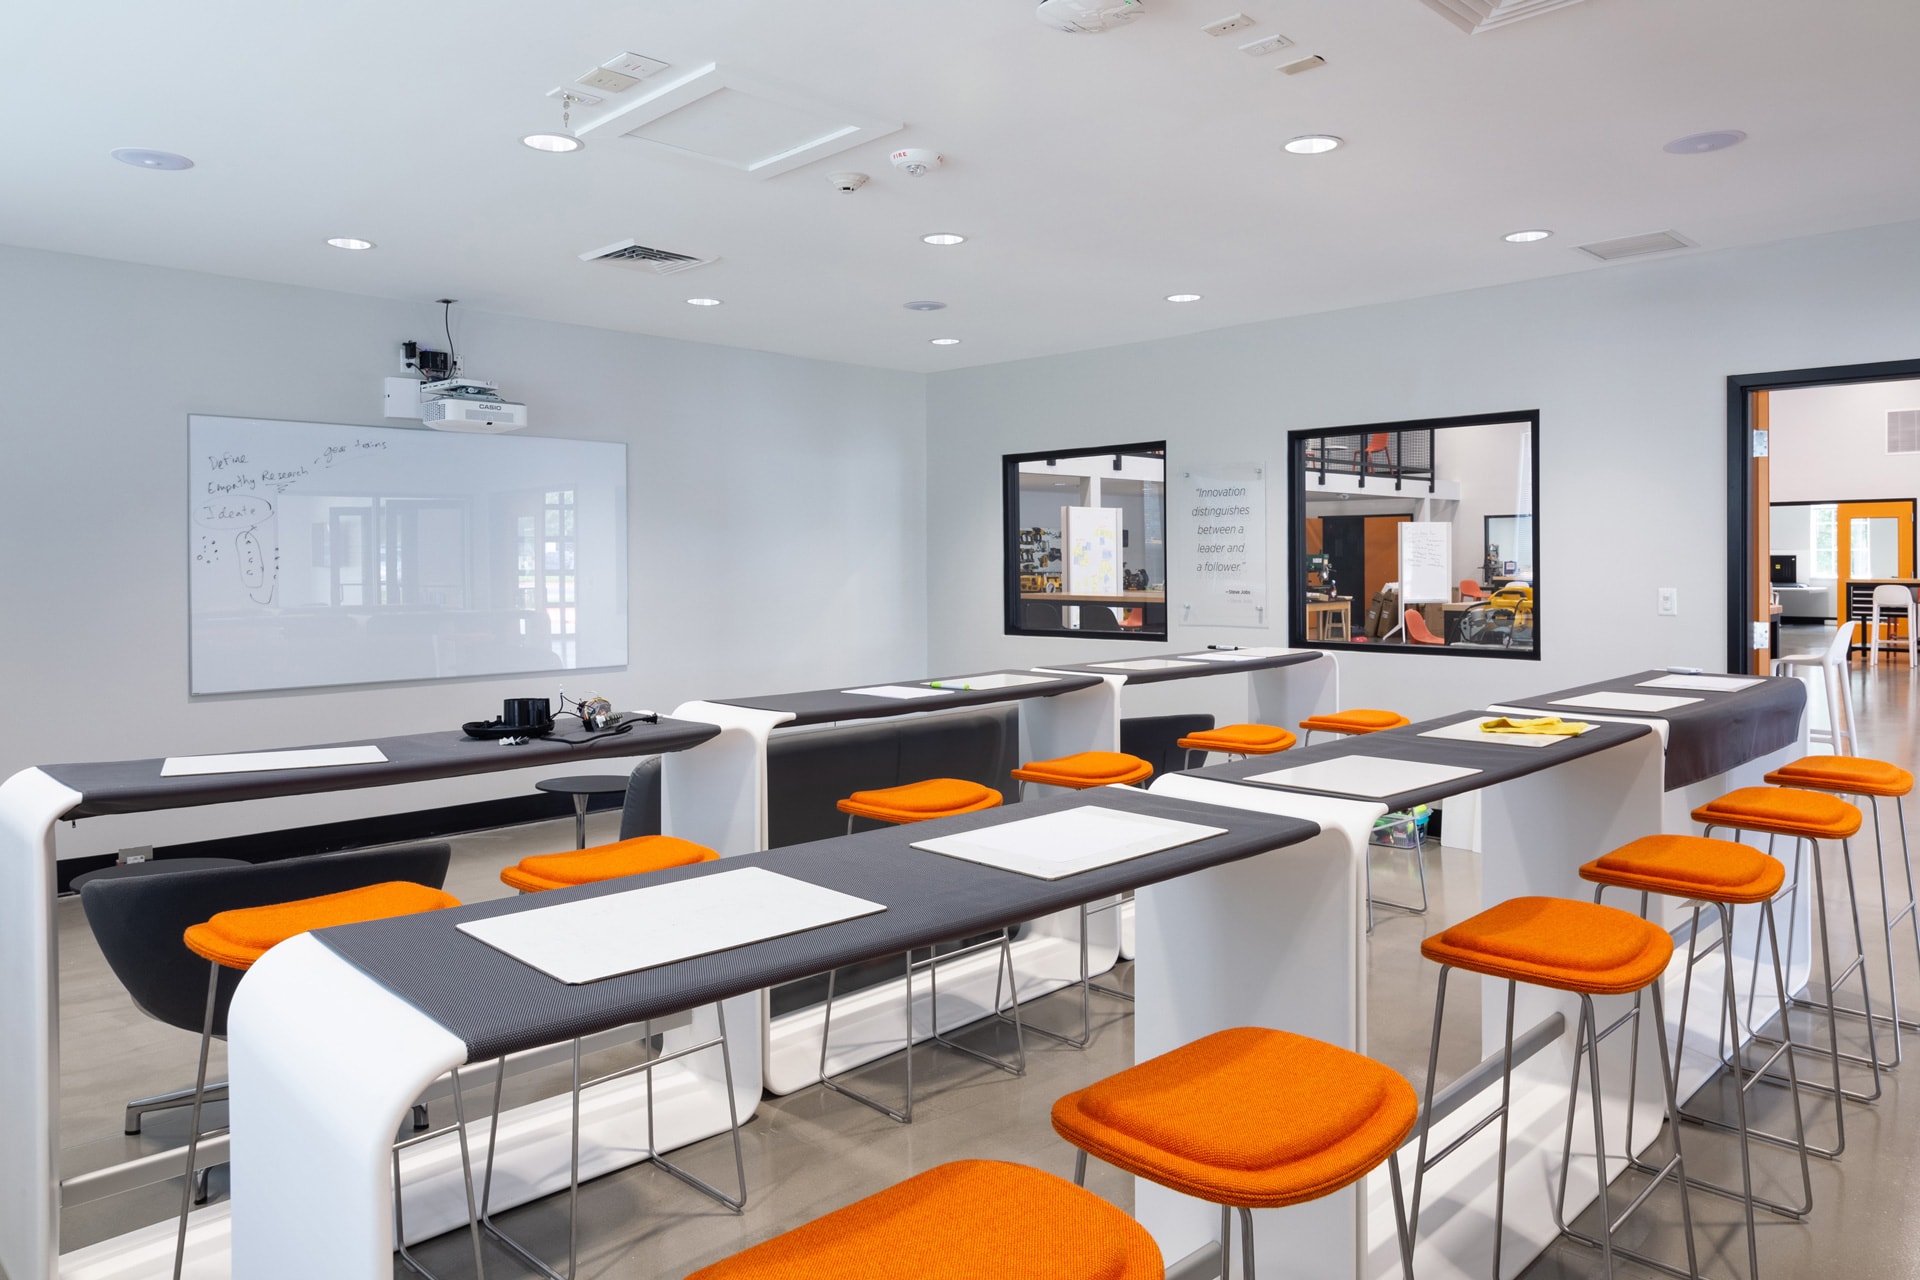 Featured image for “FADER INNOVATION CENTER AT MCDONOGH SCHOOL”